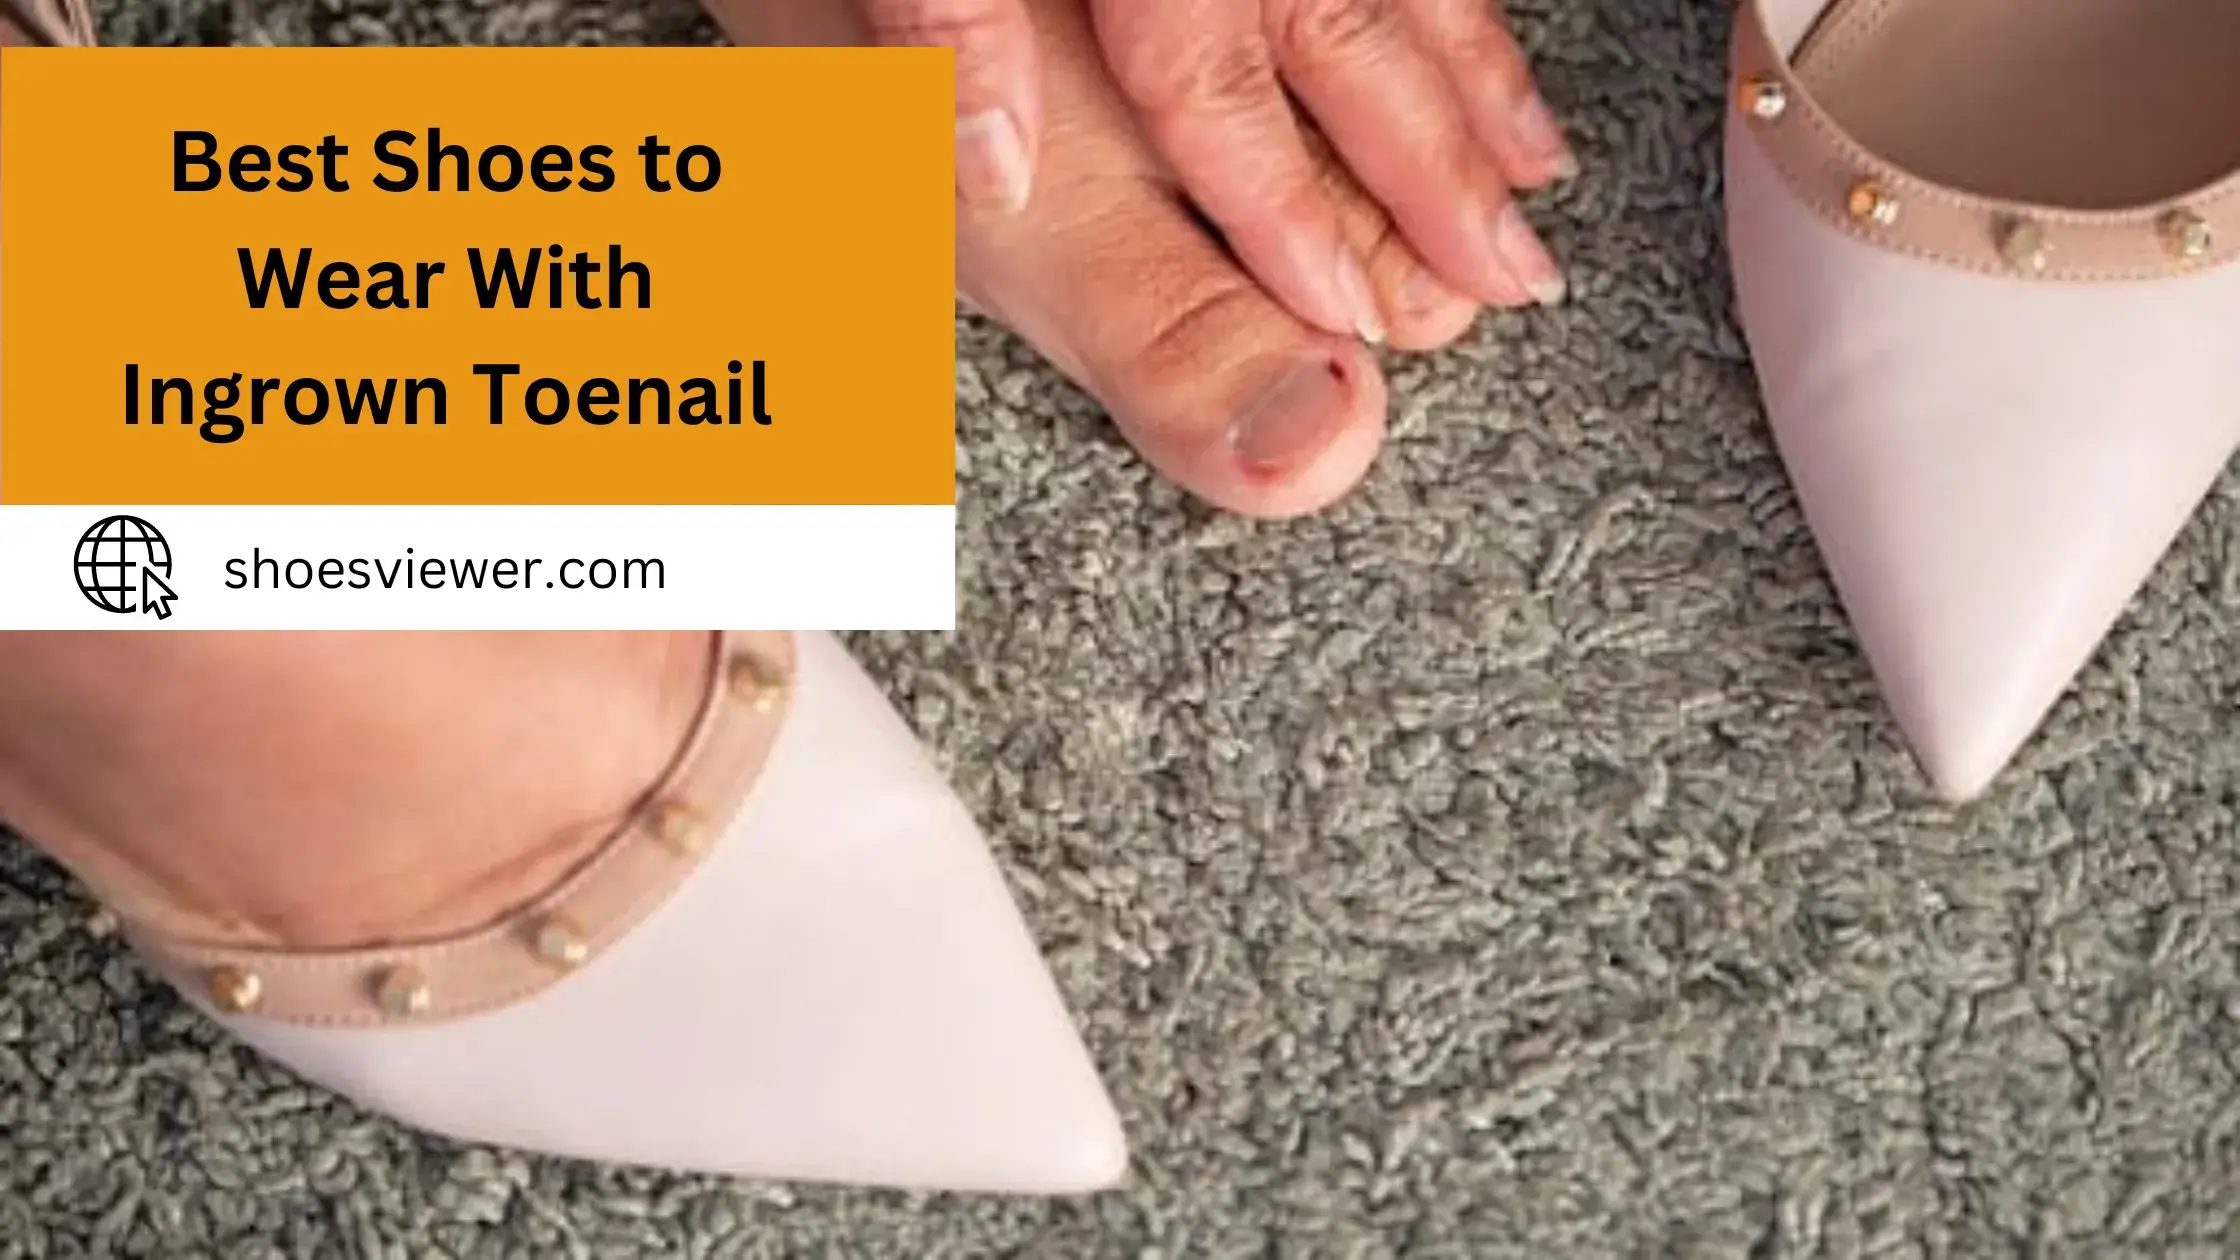 Best Shoes to Wear With Ingrown Toenail - (An In-Depth Guide)